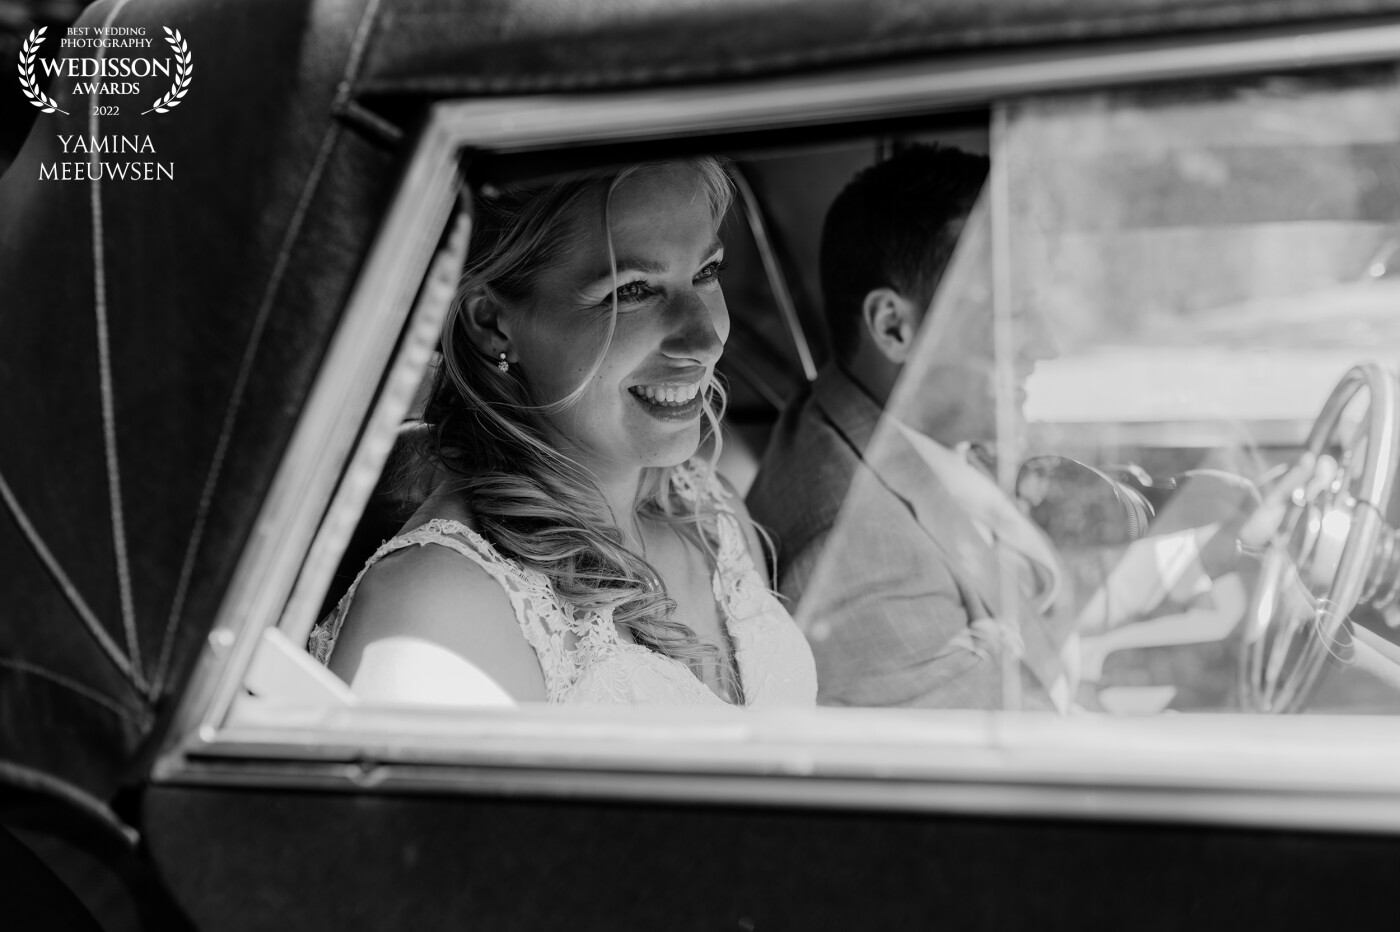 This was the moment when Sophie & Jeffrey just arrived at the wedding venue where their family and friends were going to see them for the first time. And the bride's look says it all , she couldn't wait to show what a beautiful bride she was.